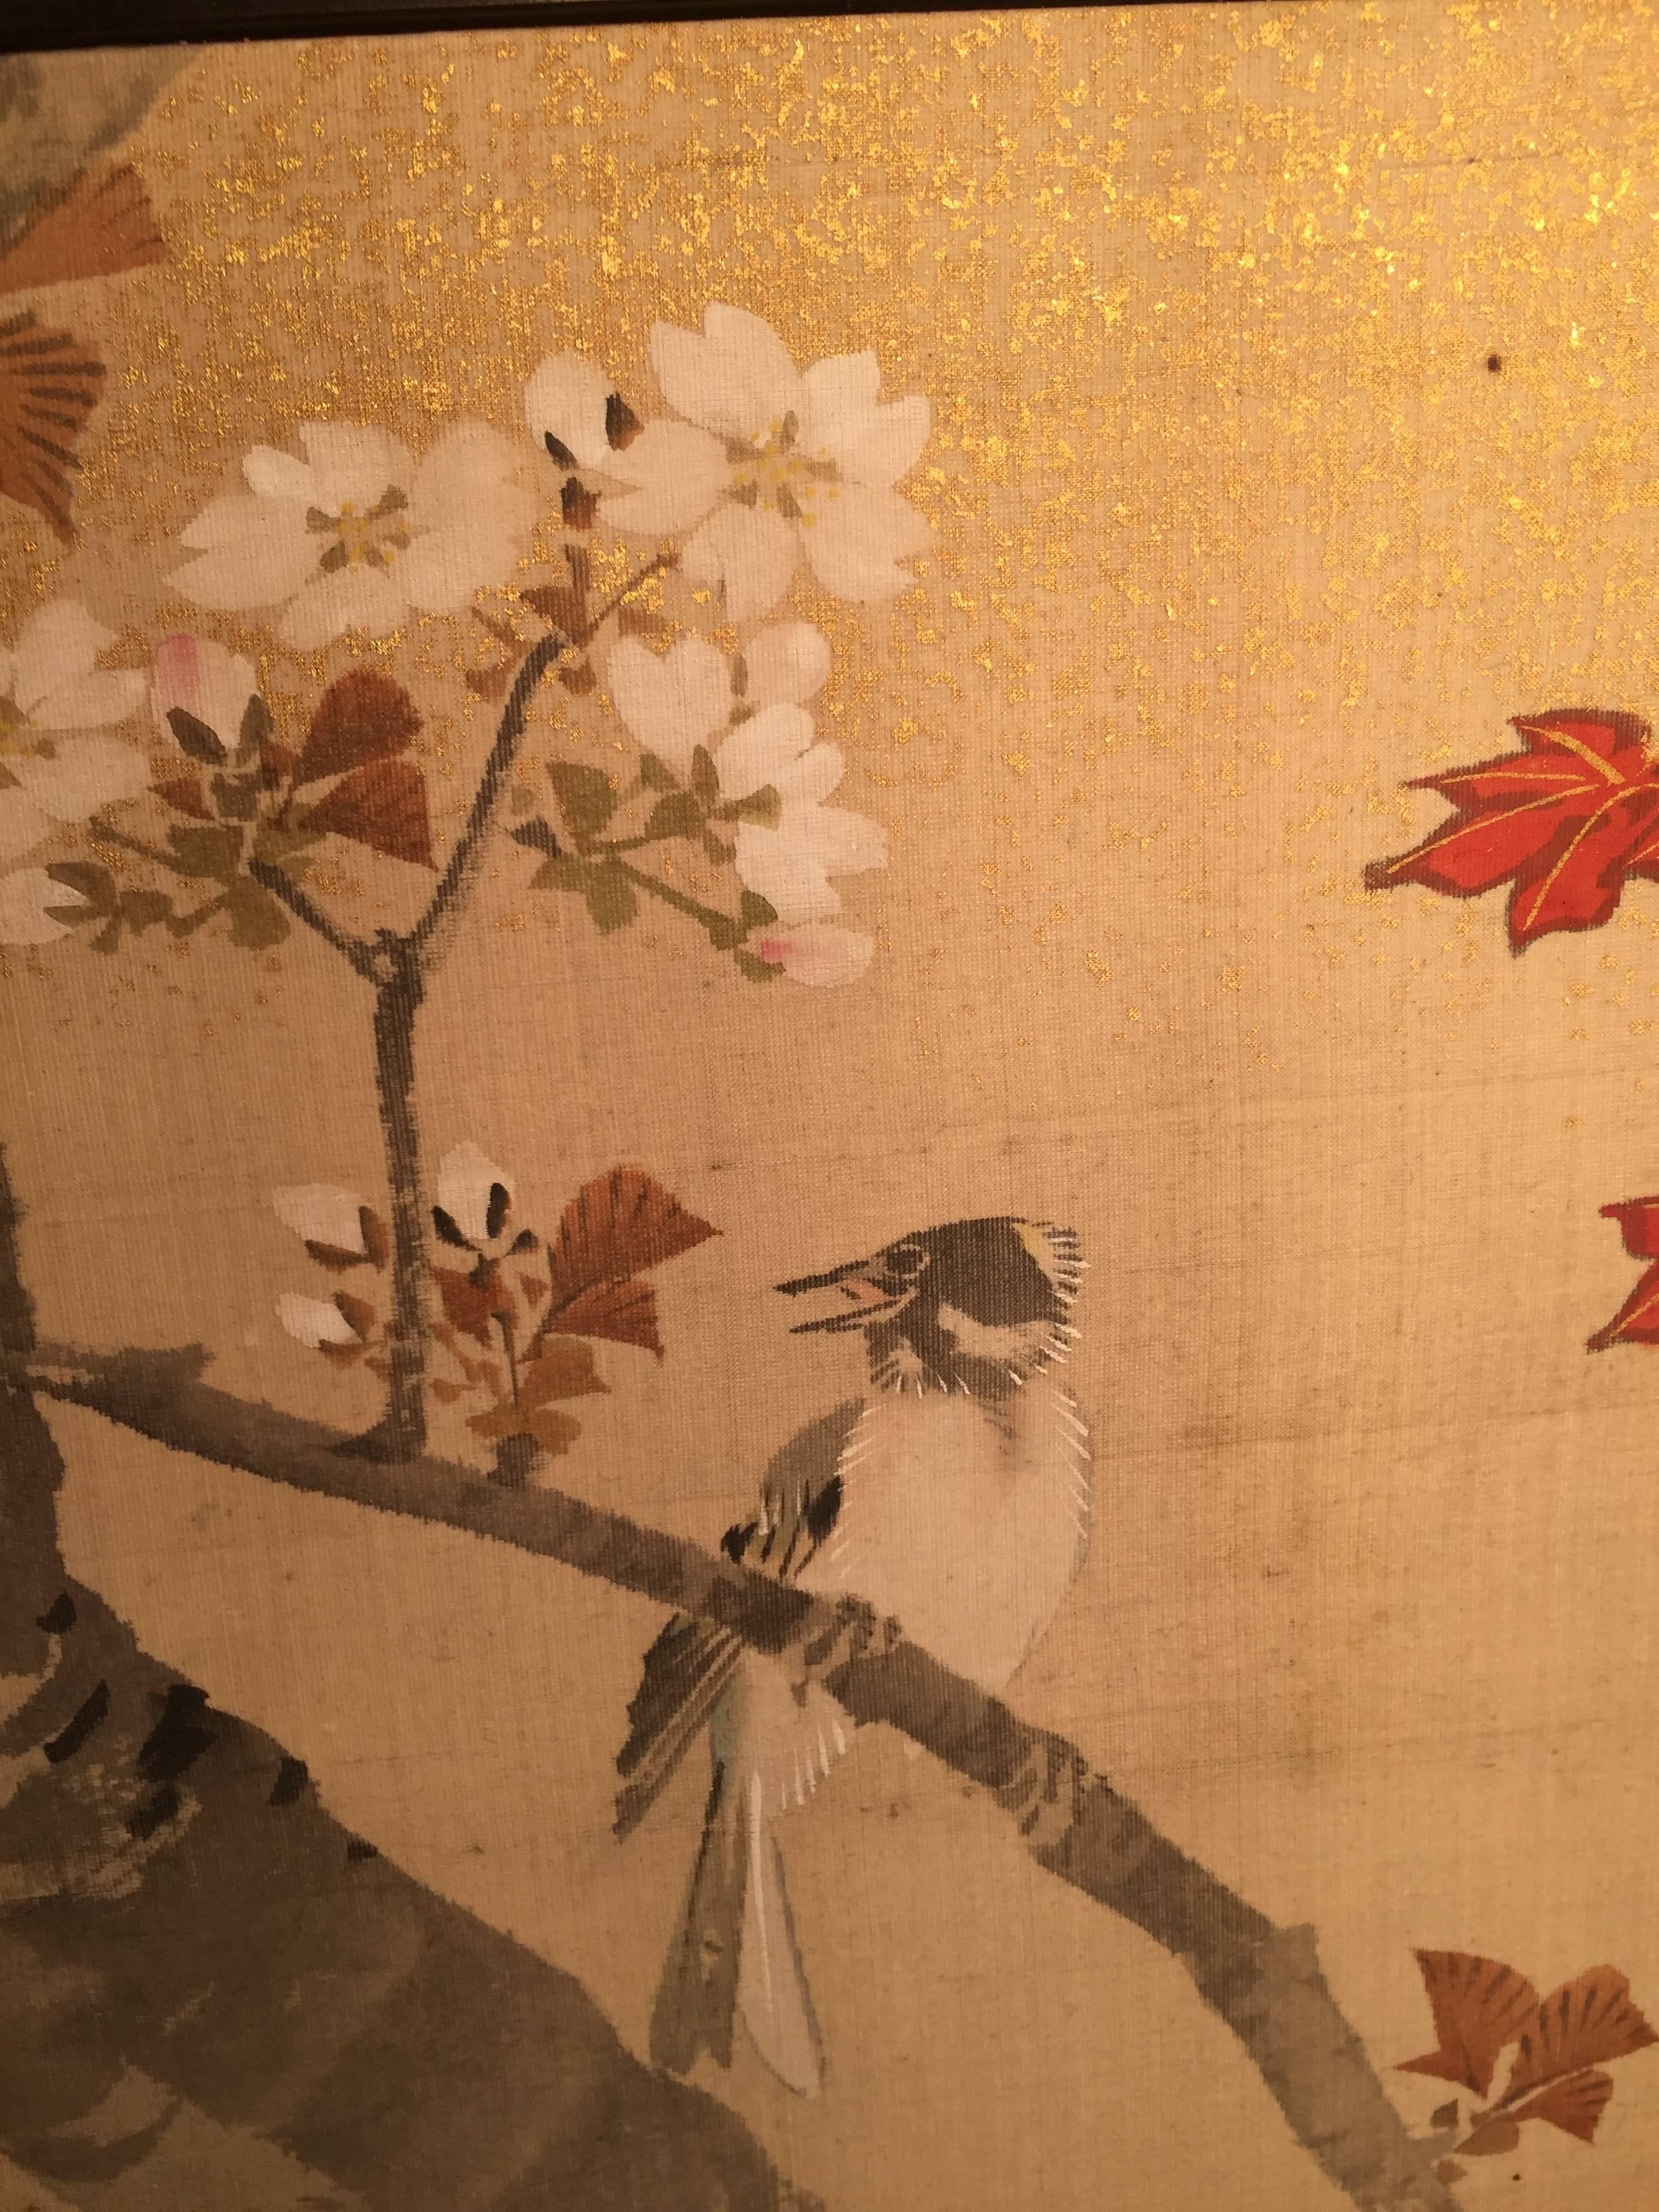 Hand-Crafted Japan Two Antique Hand-Painted Gold Mist Birds, Maples Flowering Tree Paintings